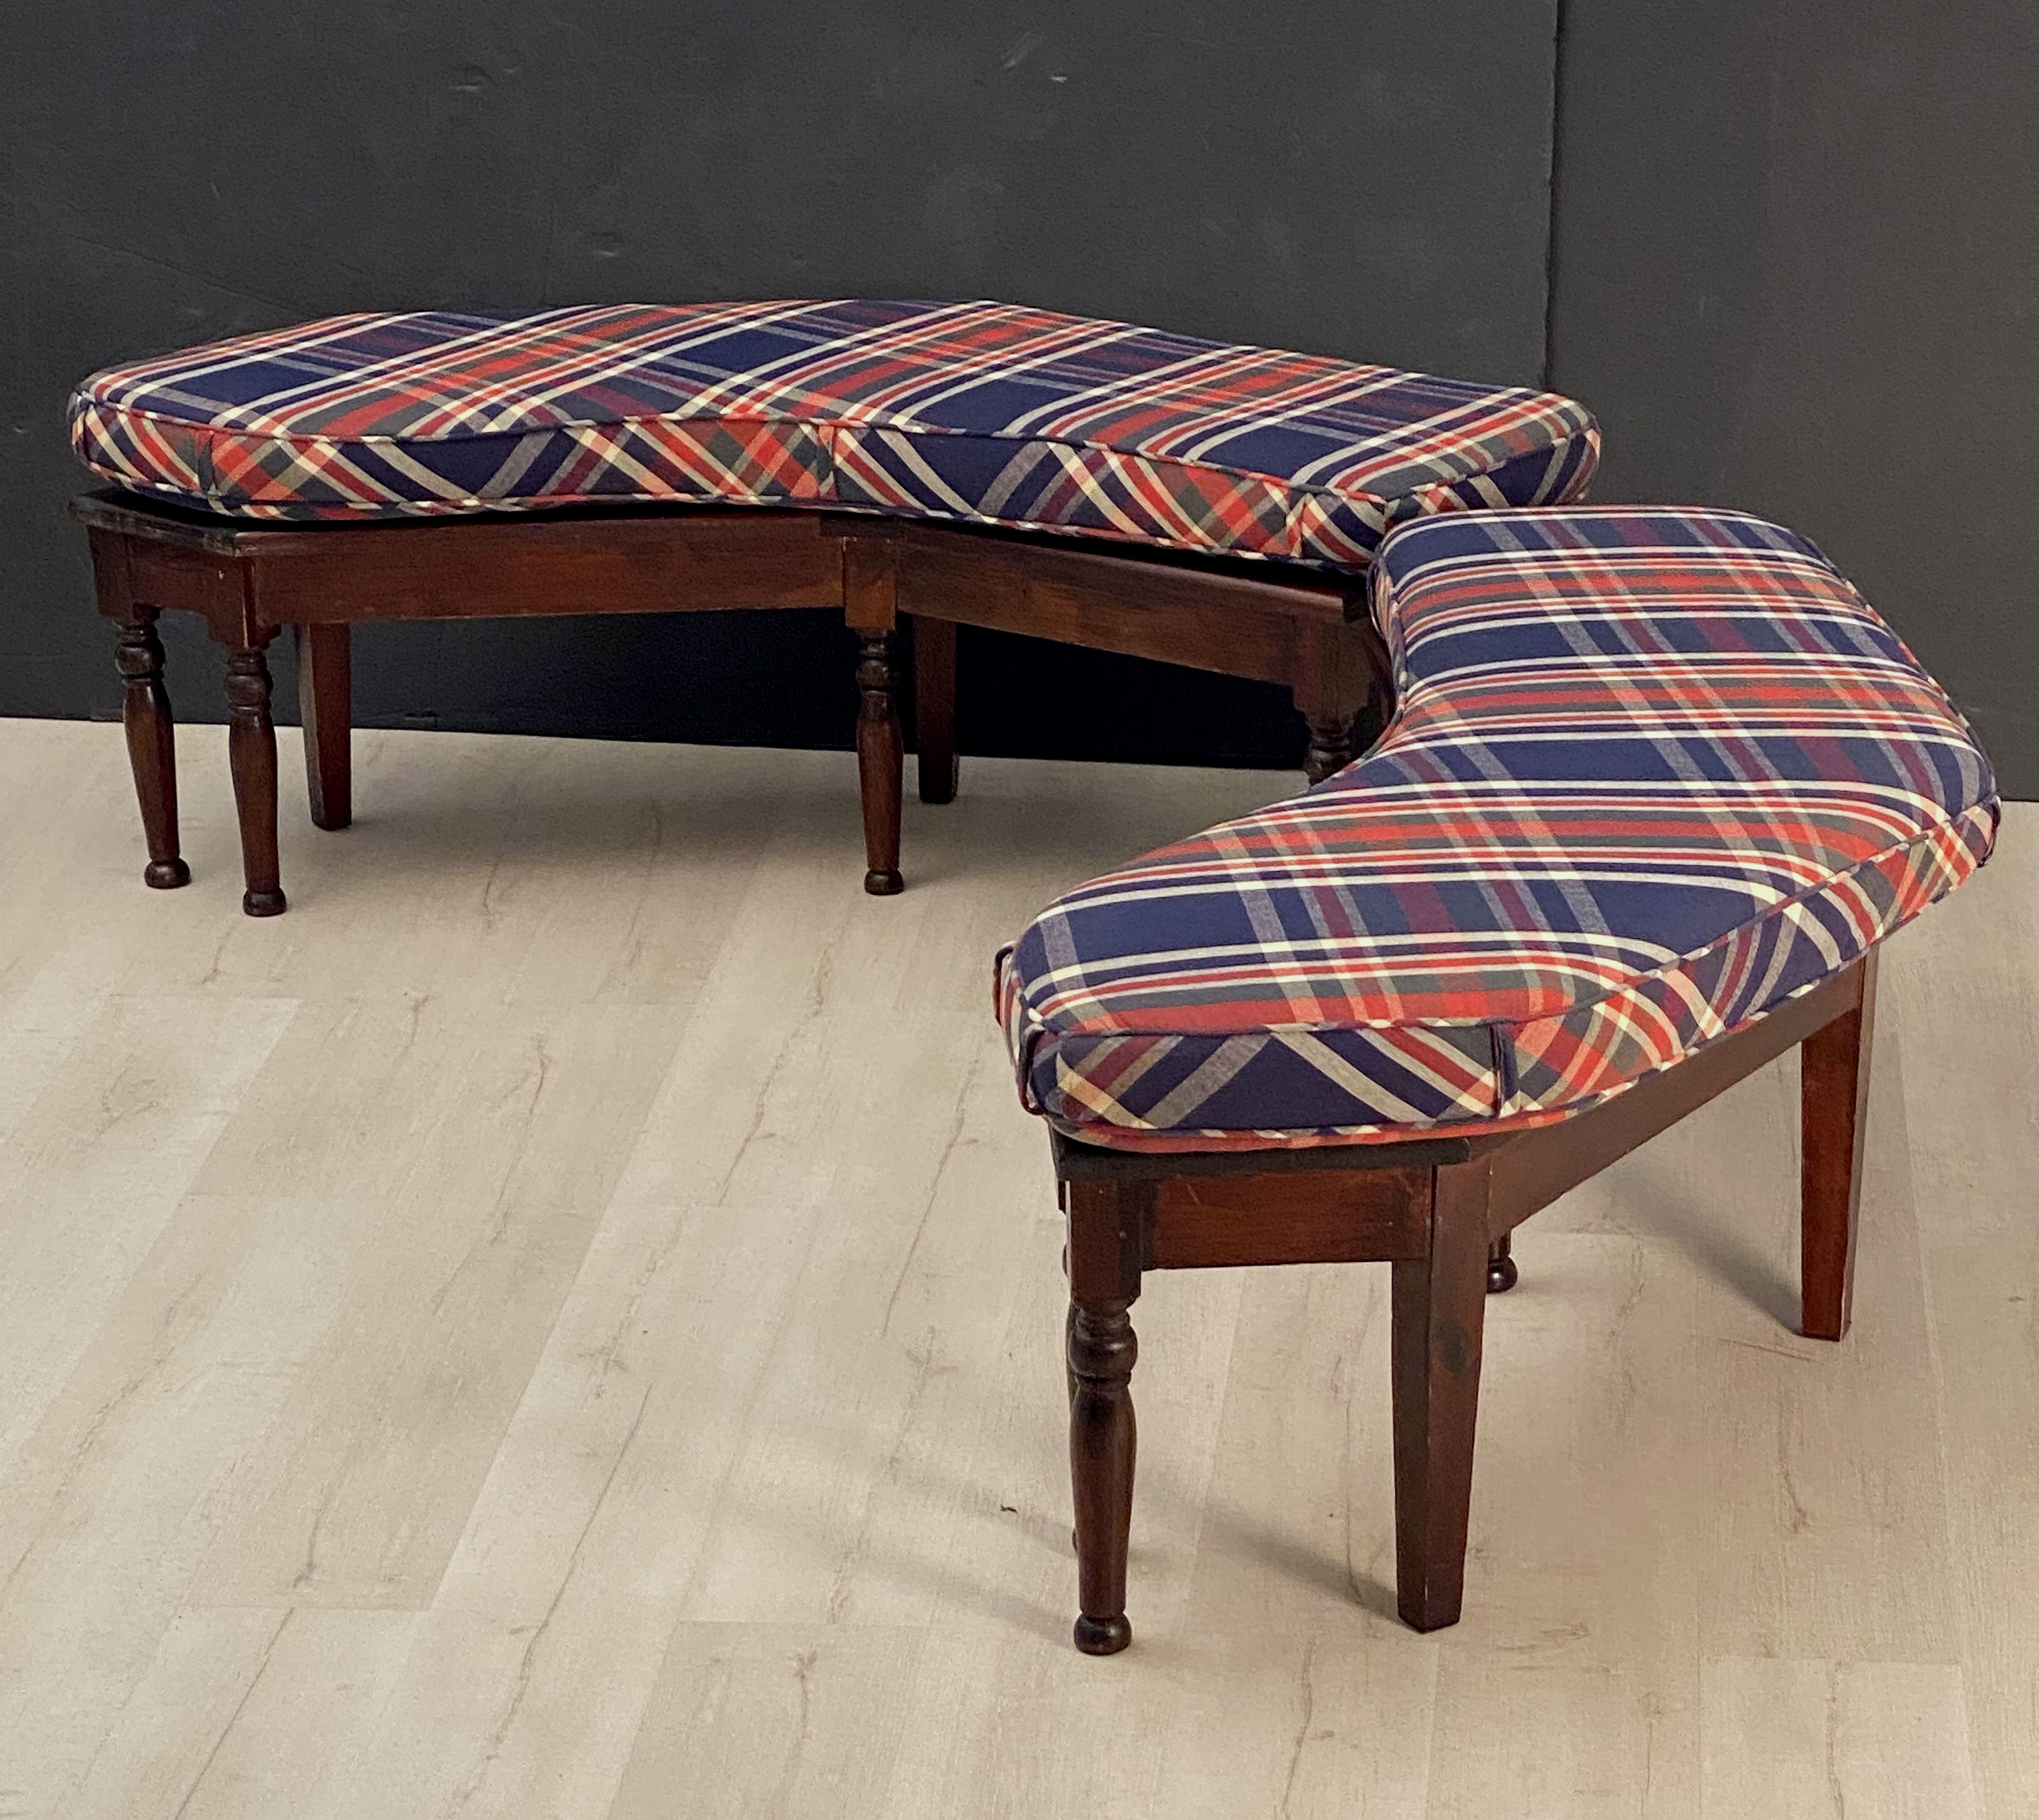 20th Century Pair of English Canted Benches or Window Seats with Cushions - Priced as Pair